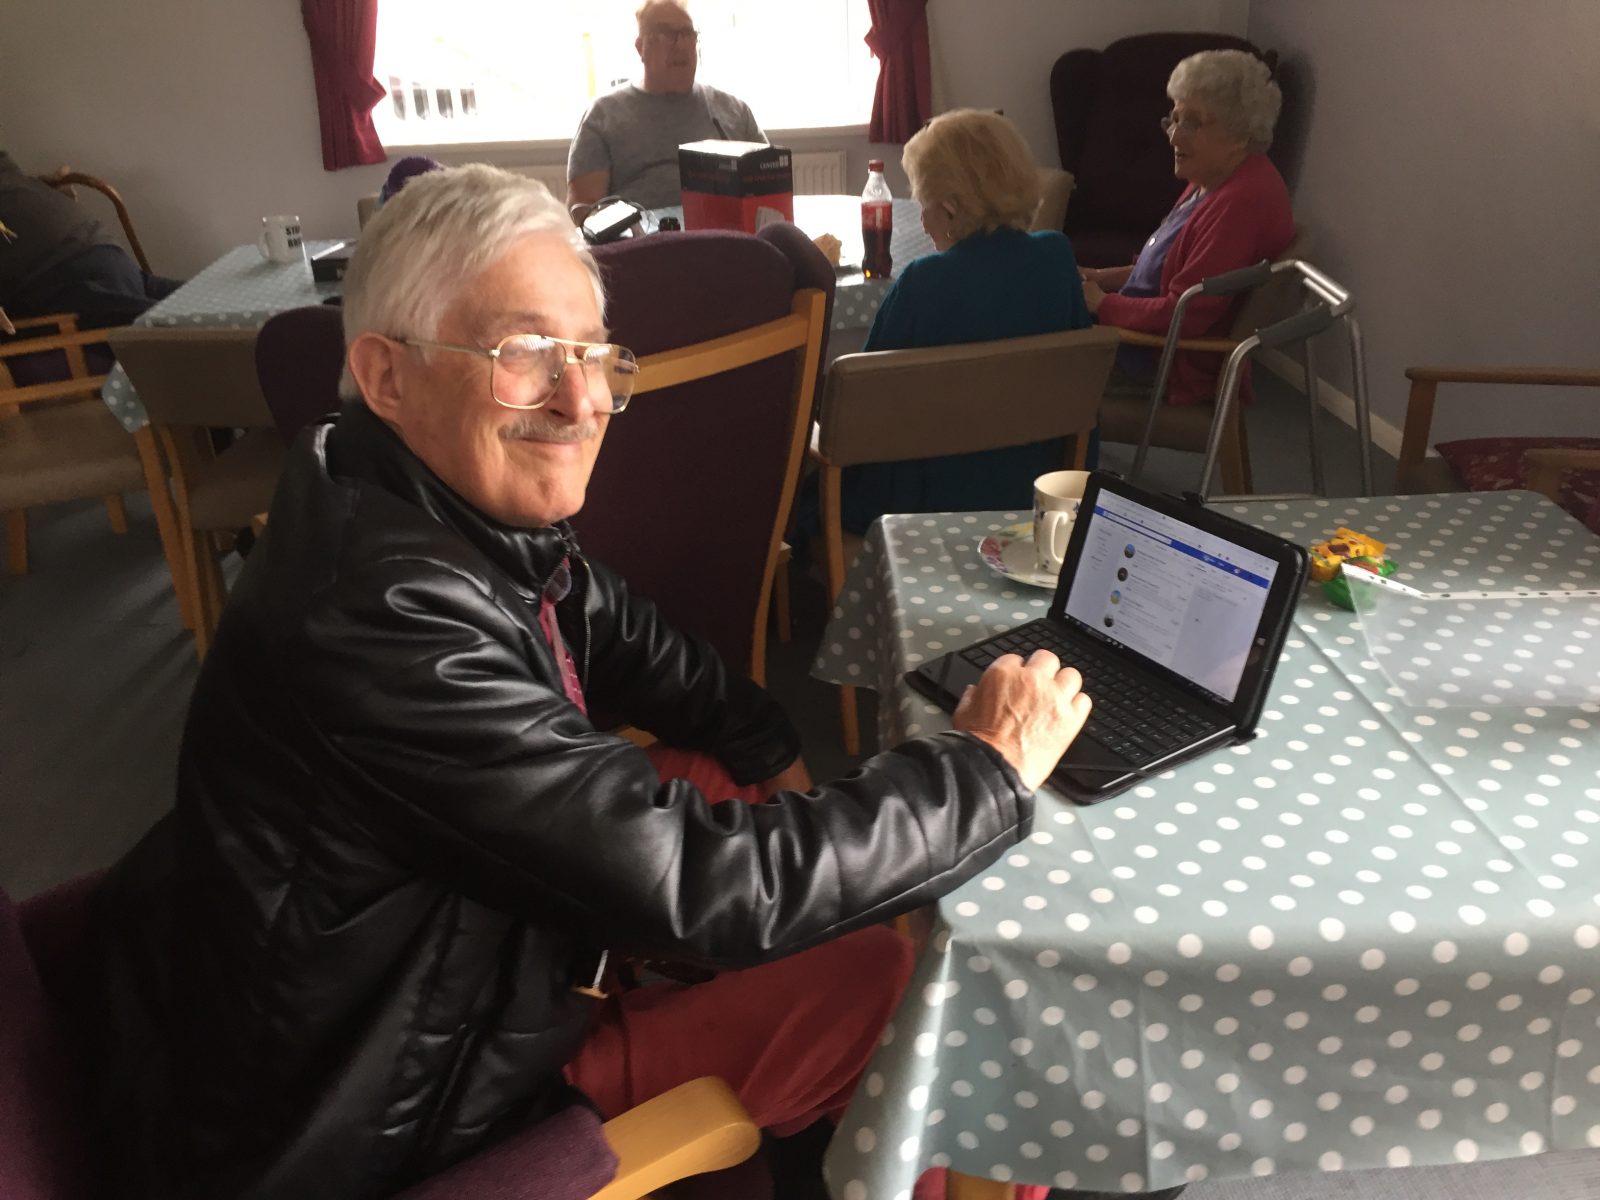 Bob shares his love of nature online